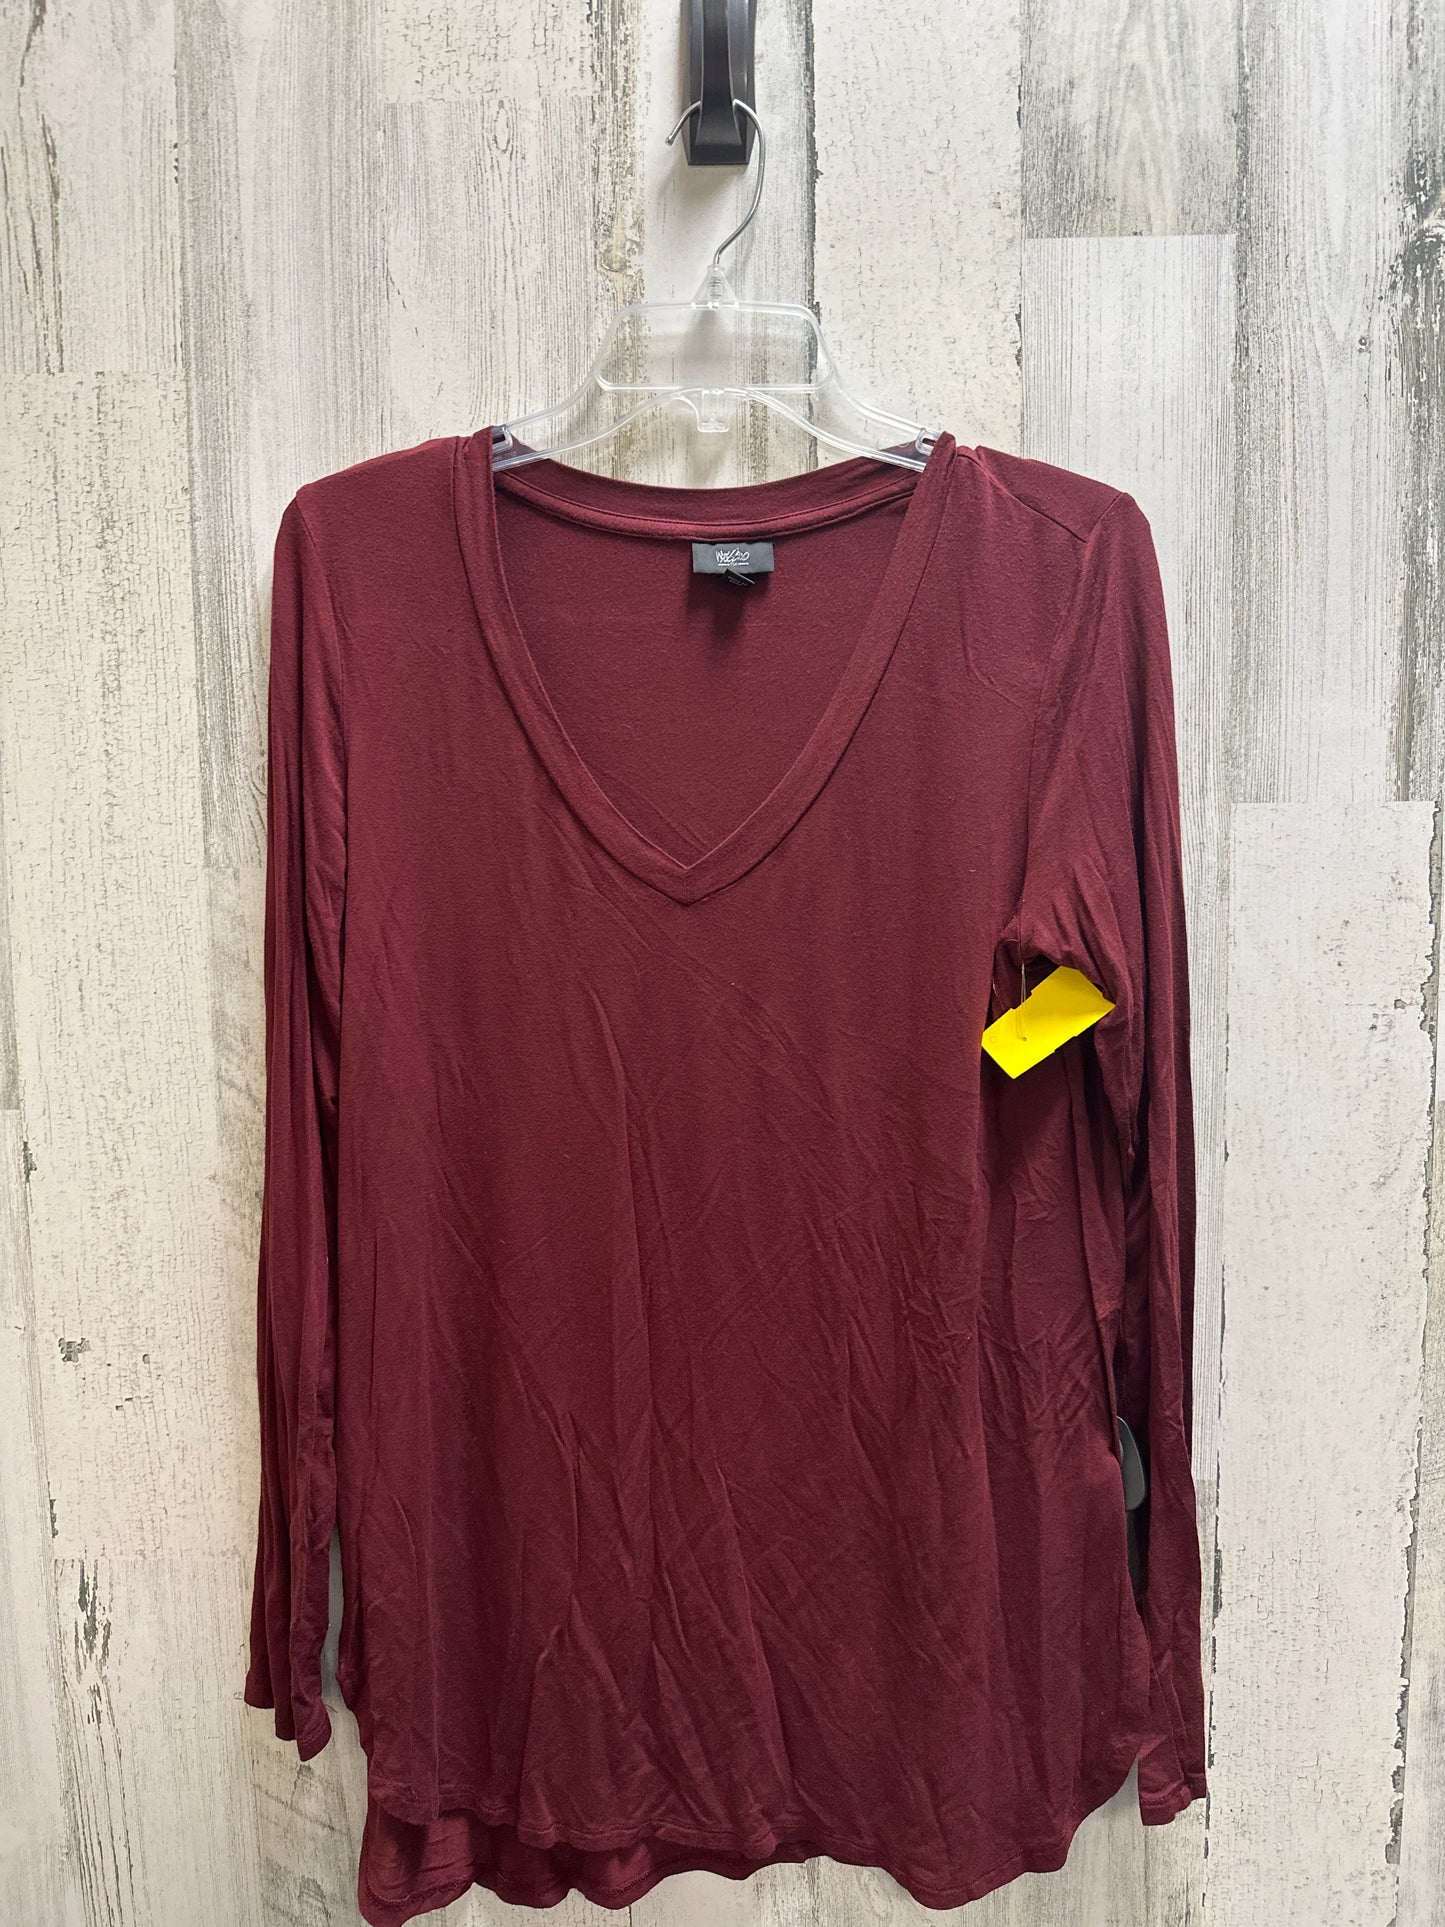 Top Long Sleeve By Mossimo  Size: M